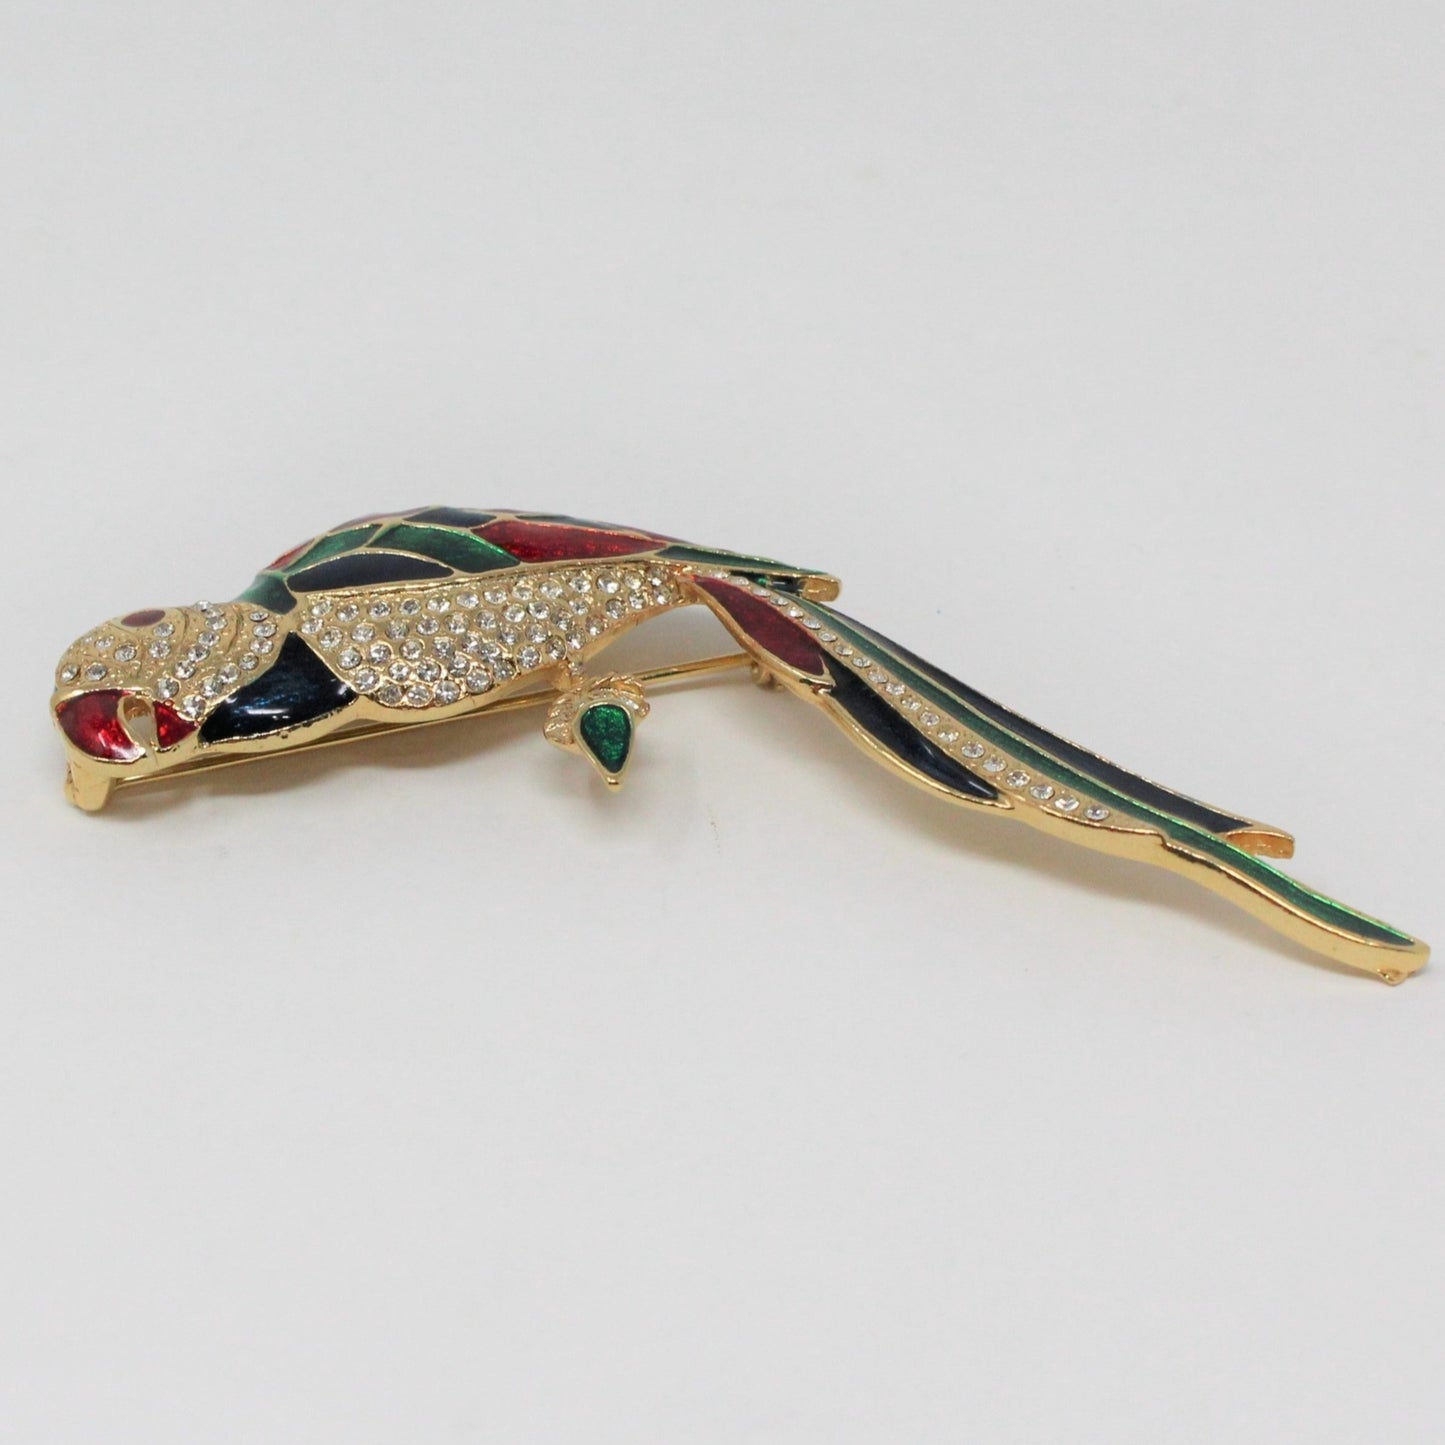 Brooch / Pin, Bird / Parrot / Macaw,  Blue, Red & Green Enamel with Rhinestones